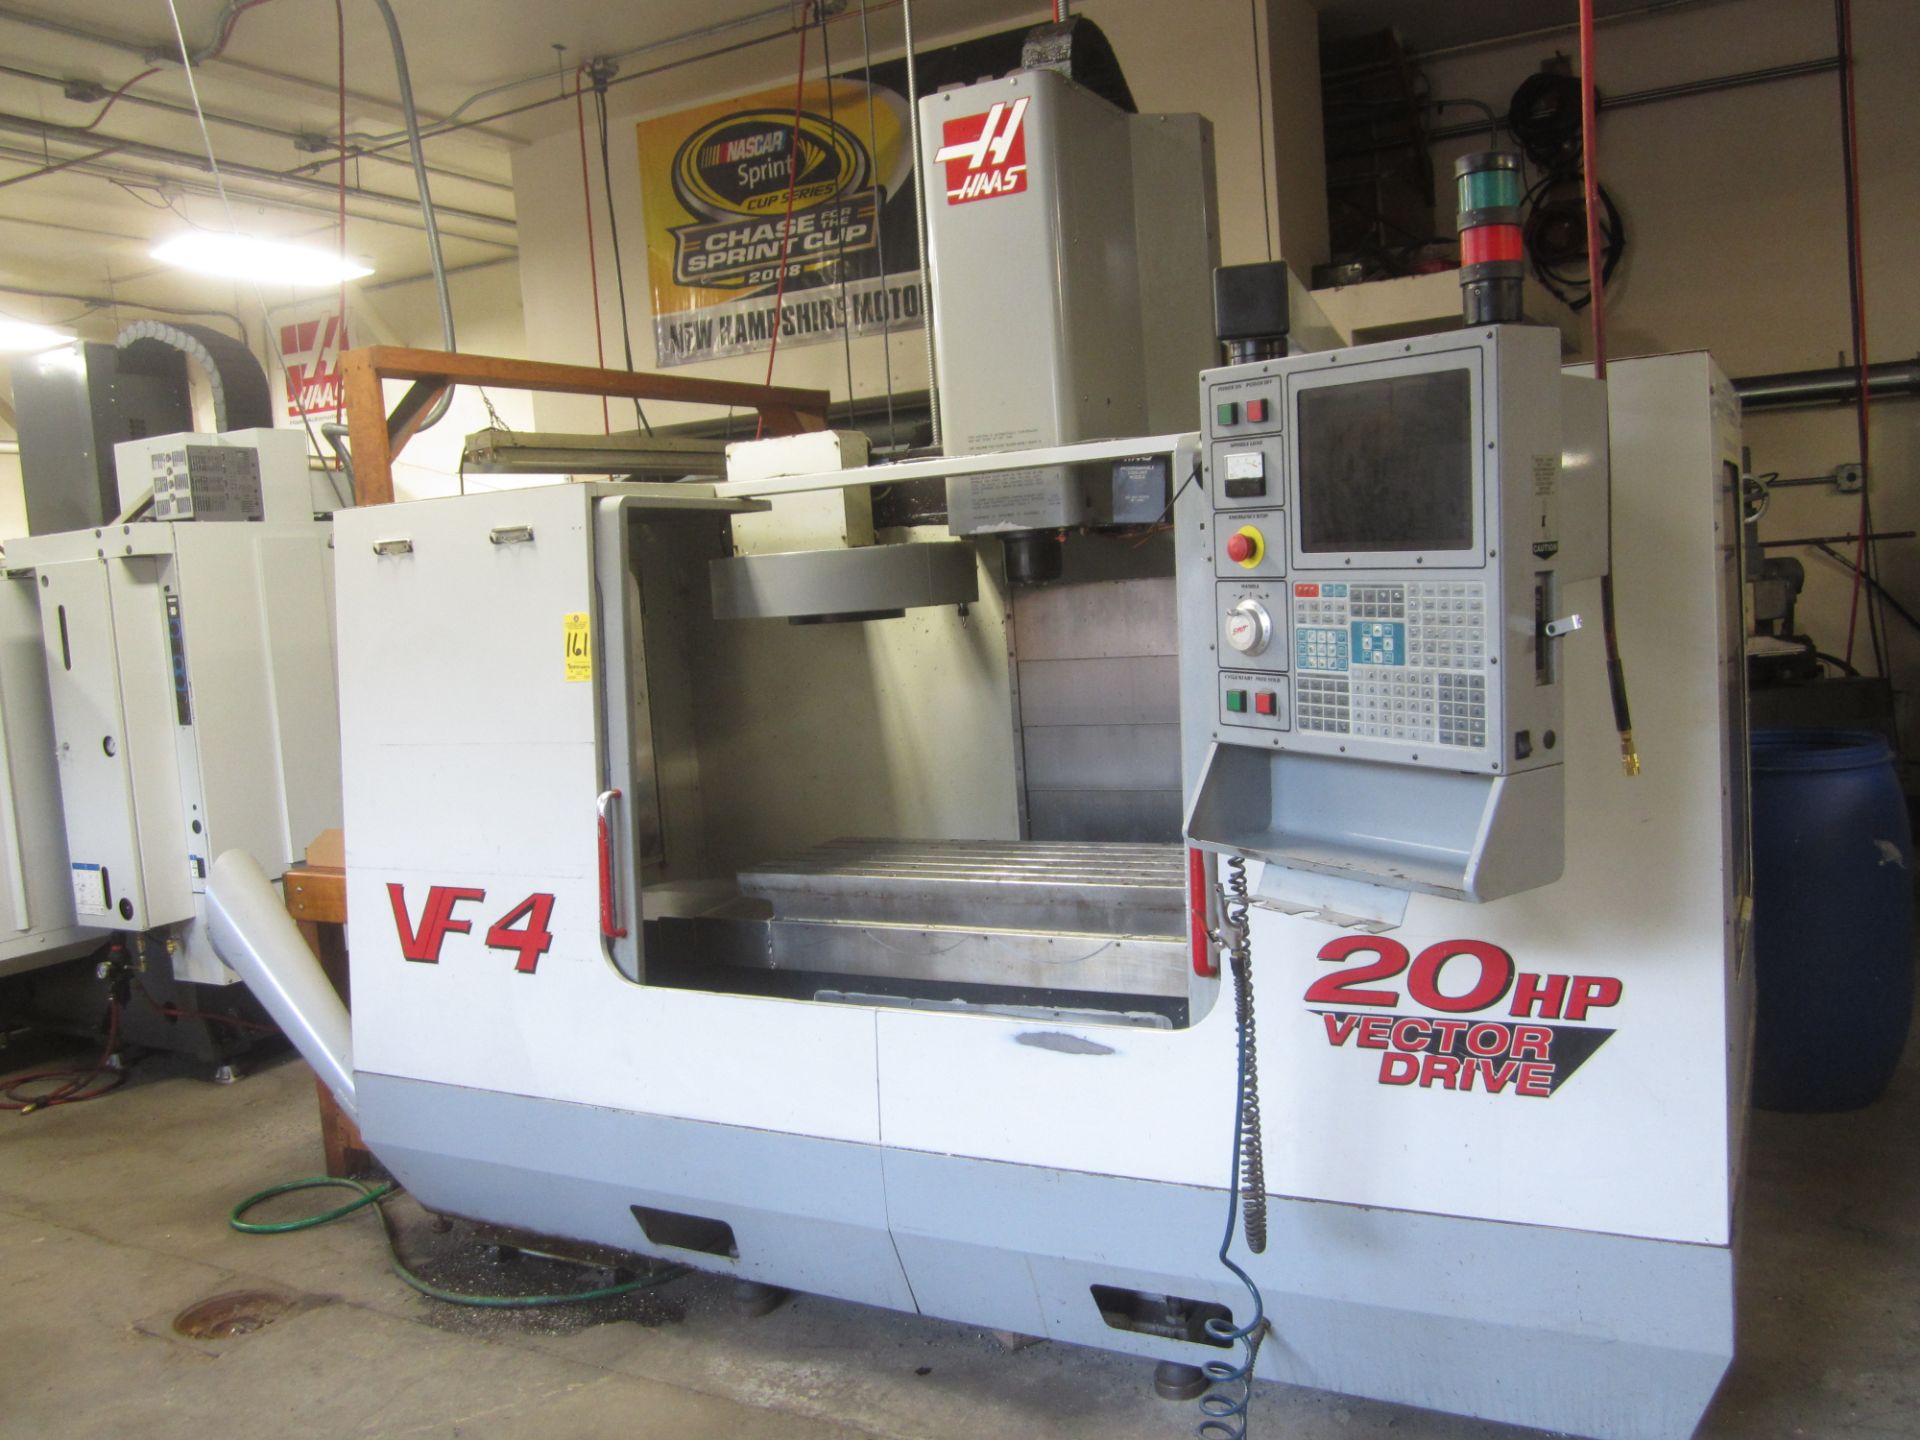 Haas VF-4 CNC Vertical Machining Center, s/n 20228, New 2000, Haas CNC Control, 20 HP, 40 Taper, - Image 2 of 16